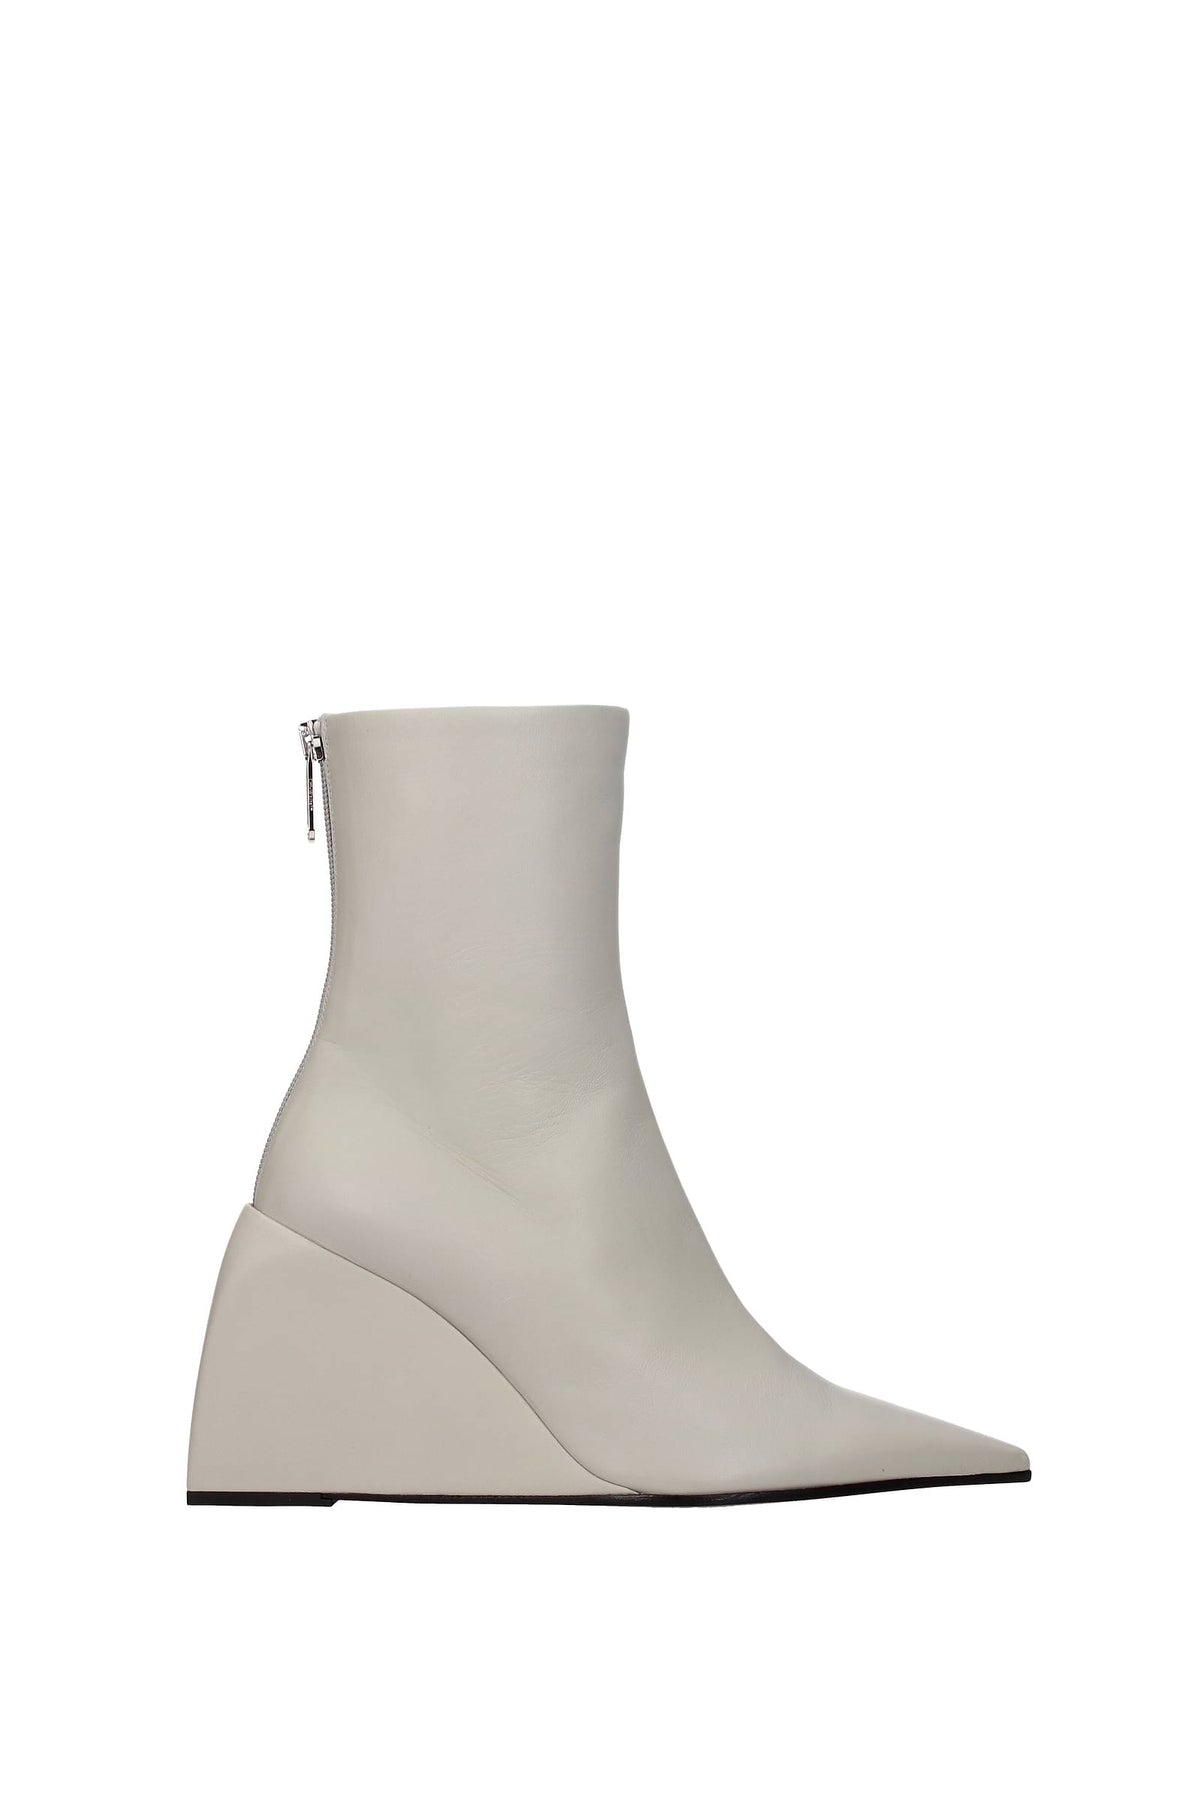 OFF-WHITE ANKLE BOOTS LEATHER GRAY